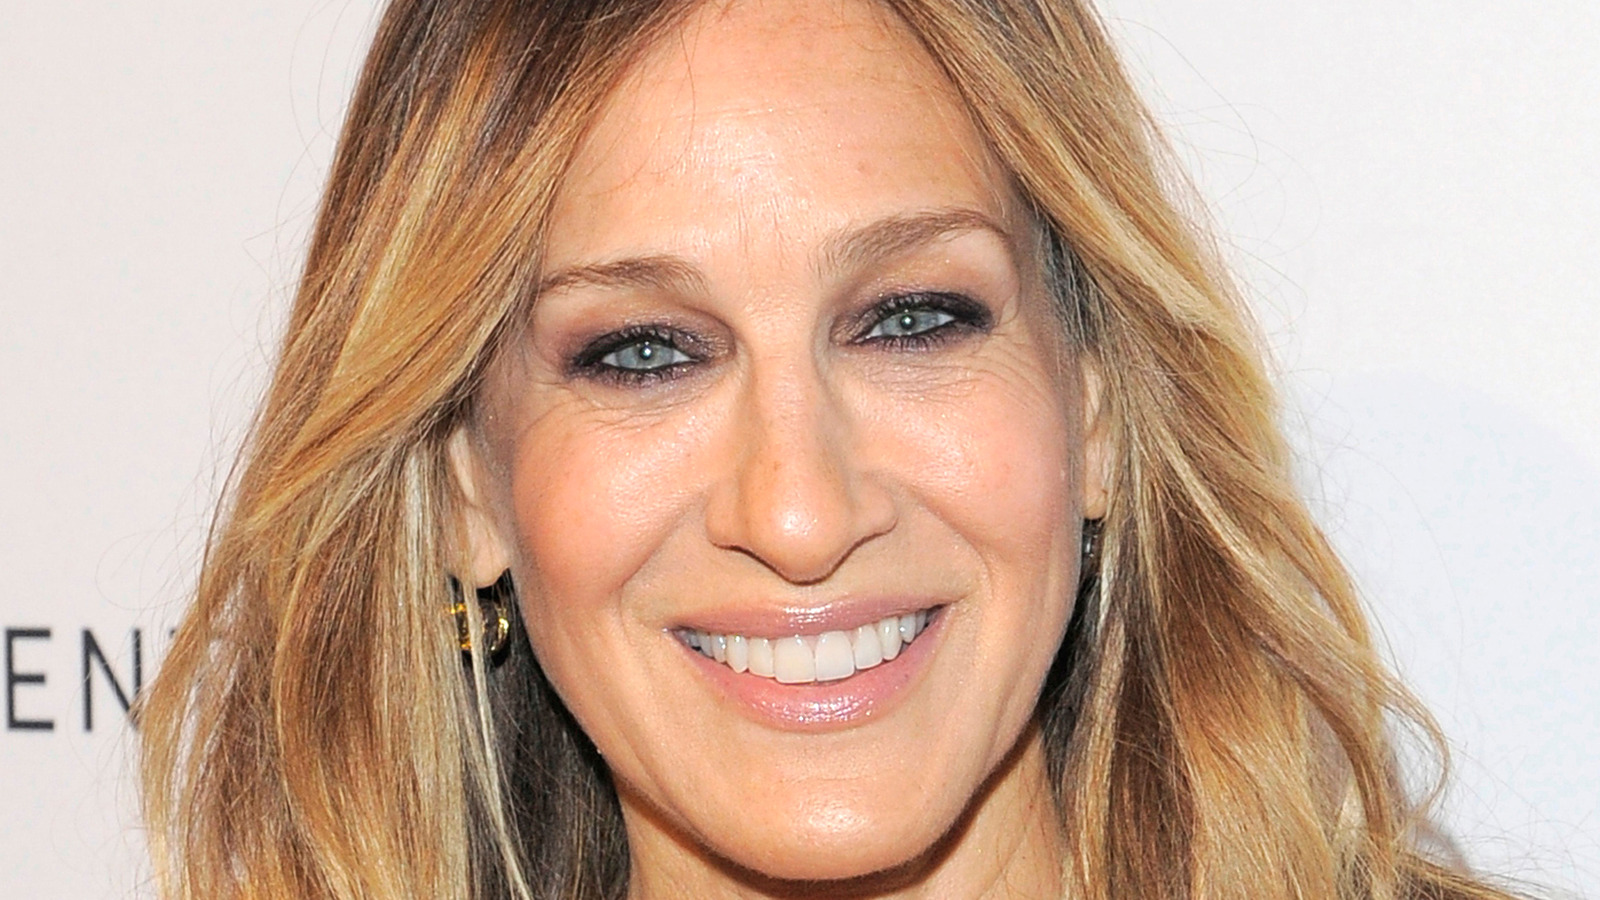 Iconic bags Sarah Jessica Parker carried in 'Sex And The City